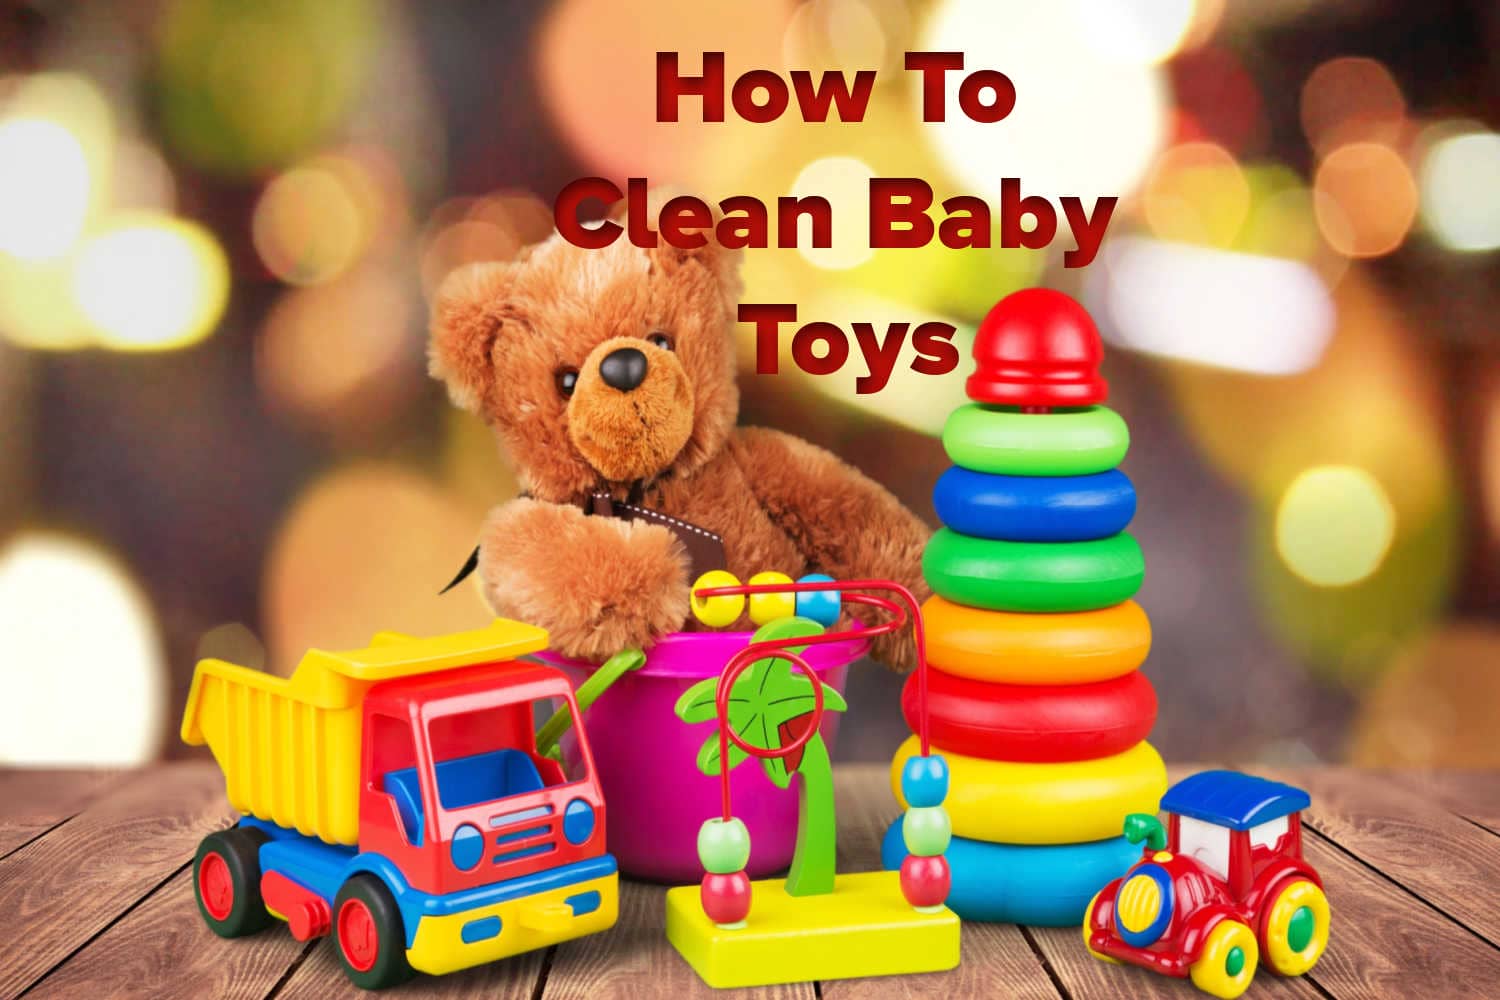 How to Clean Baby Toys – Simple and Effective Tips